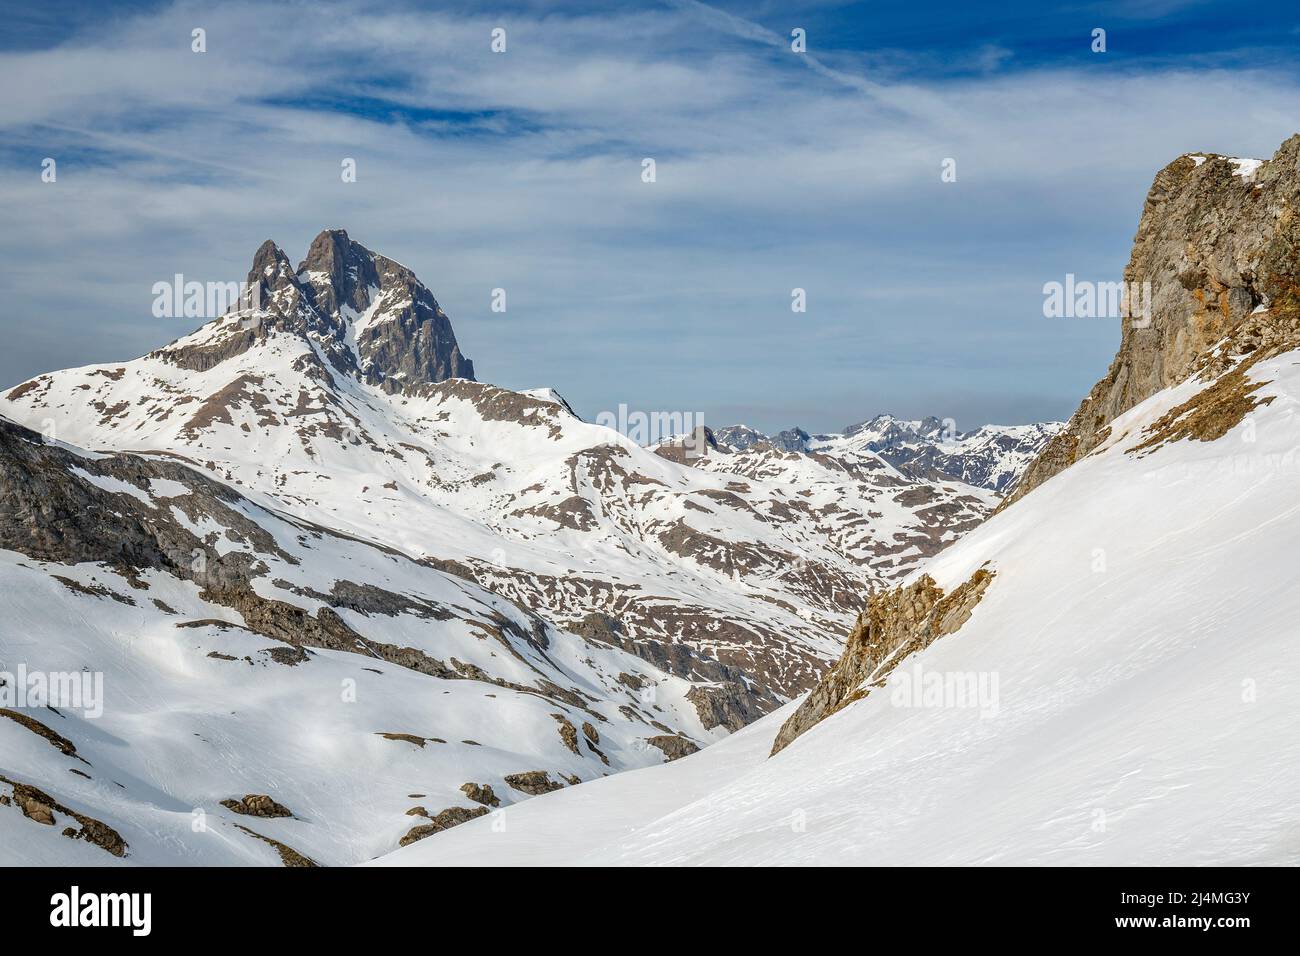 Midi d'Ossau south side peak view from Aneou circus, Pyrenees national park, France Stock Photo